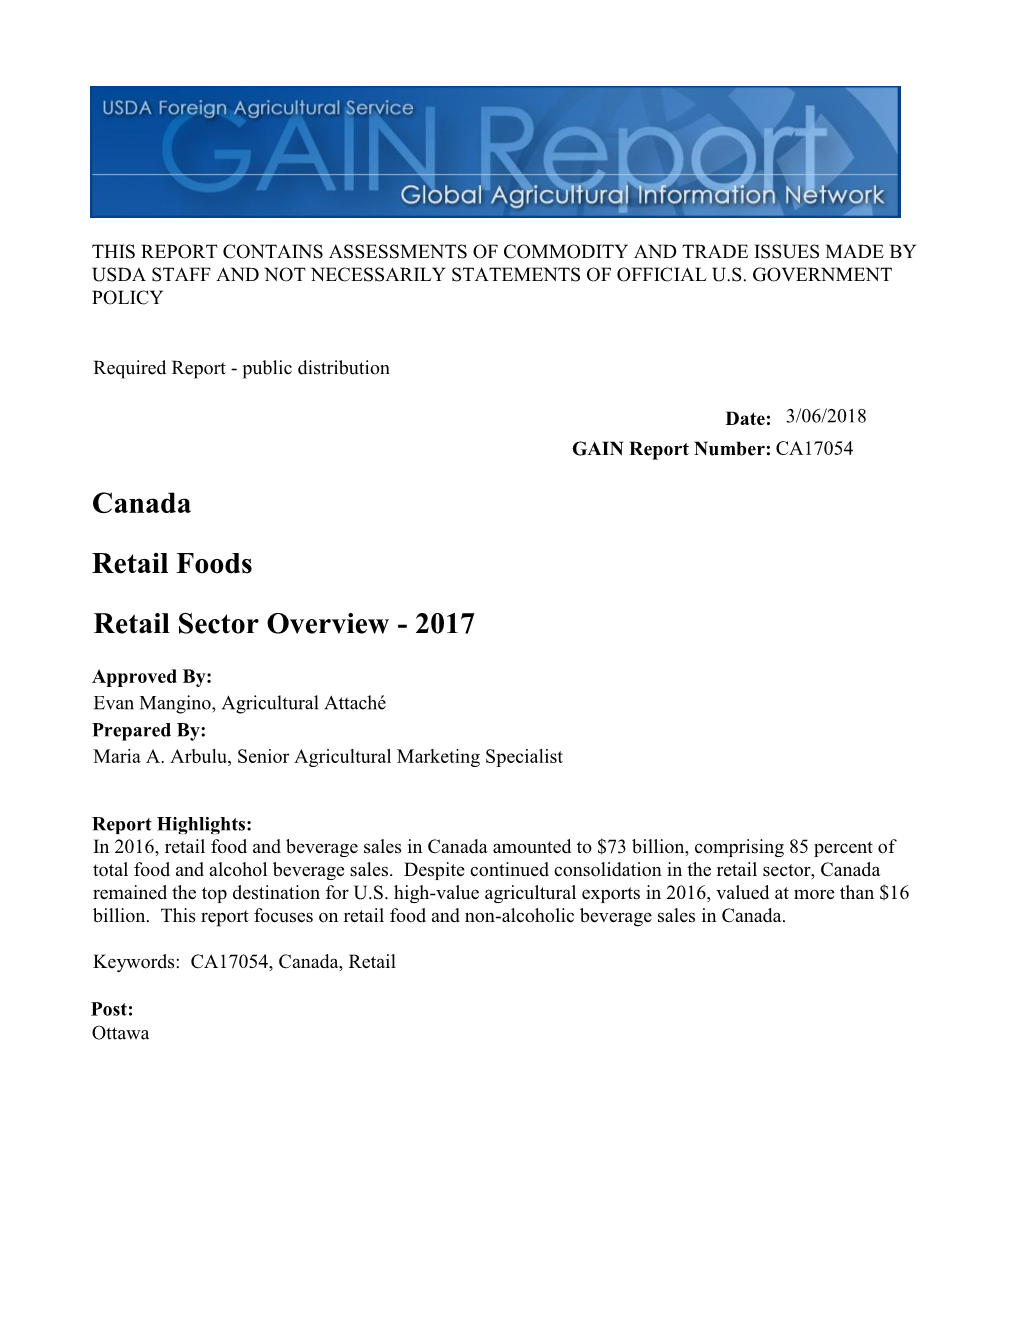 Retail Sector Overview - 2017